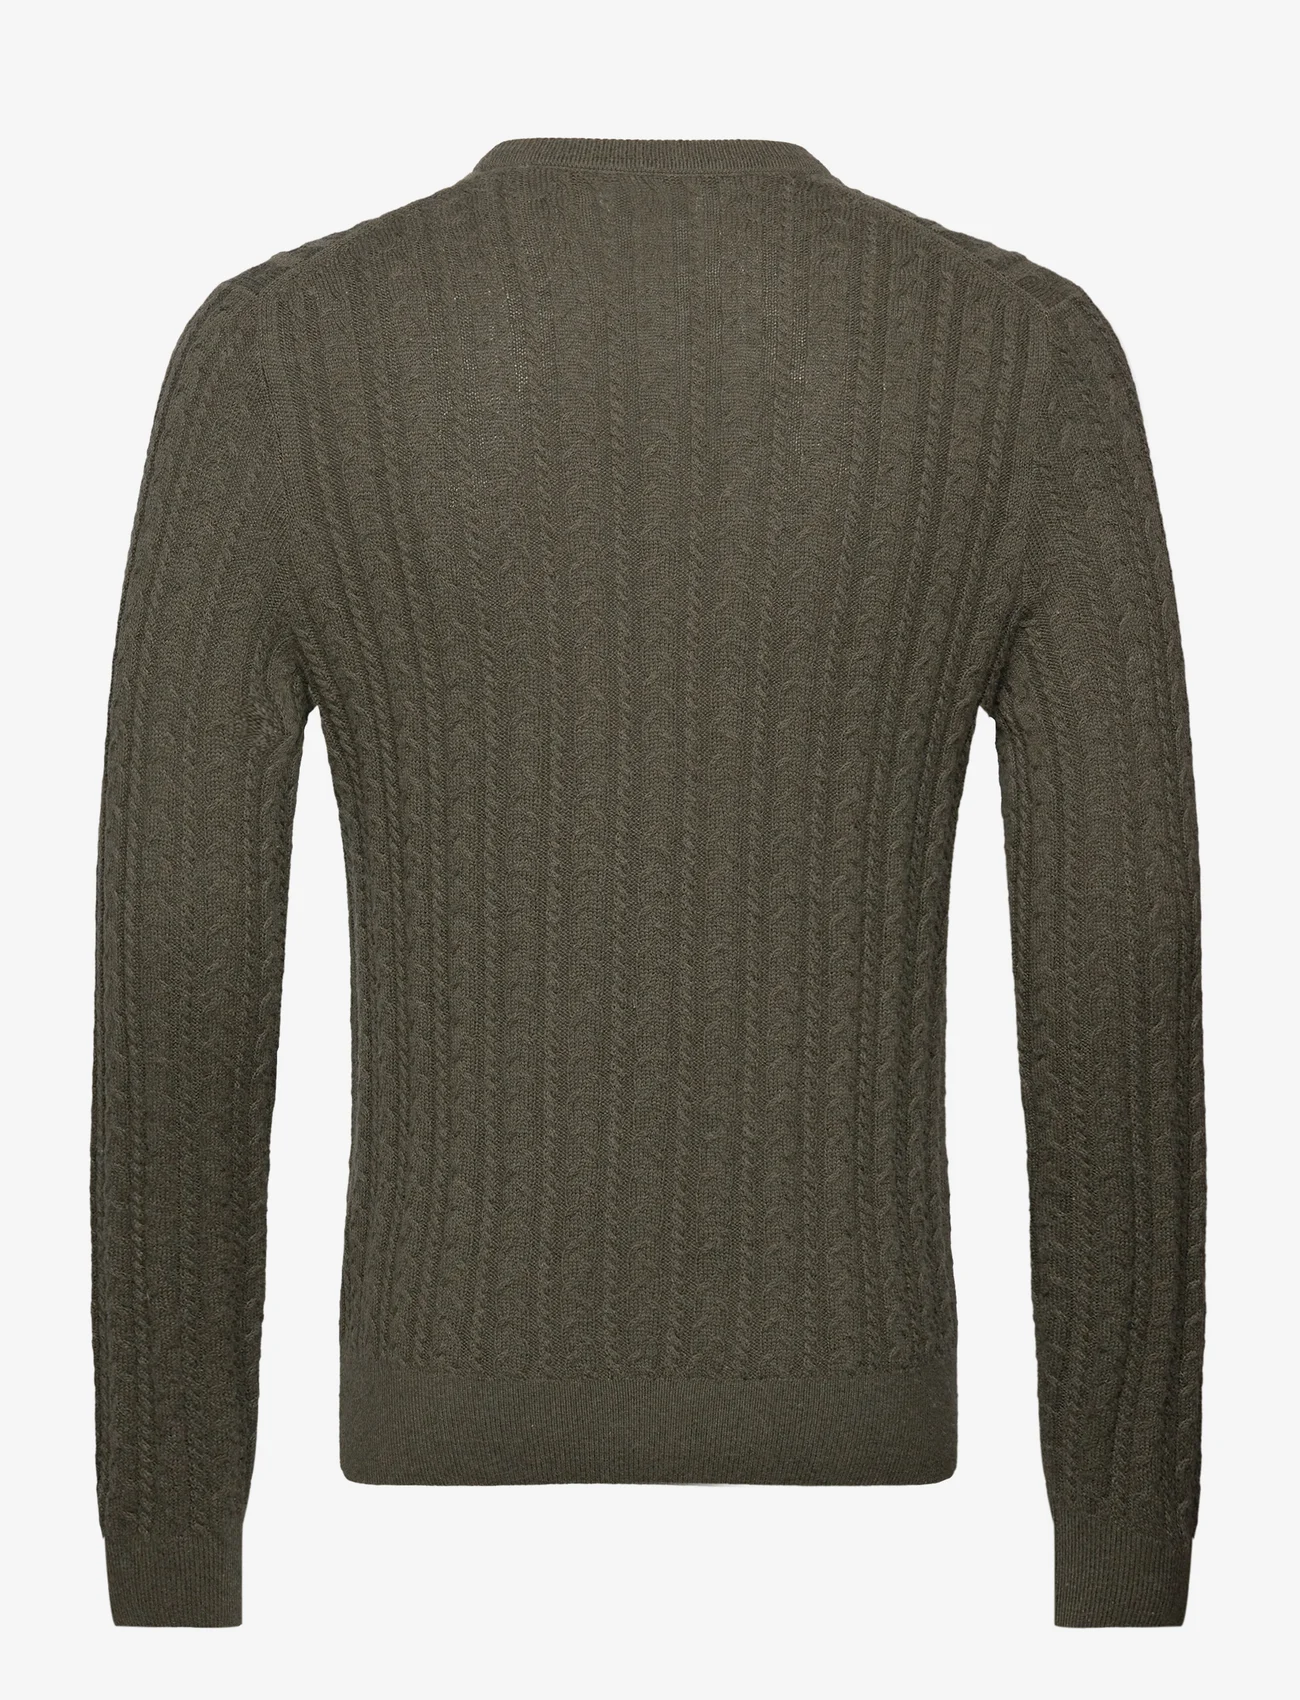 Abercrombie & Fitch - ANF MENS SWEATERS - knitted round necks - olive heather - 1